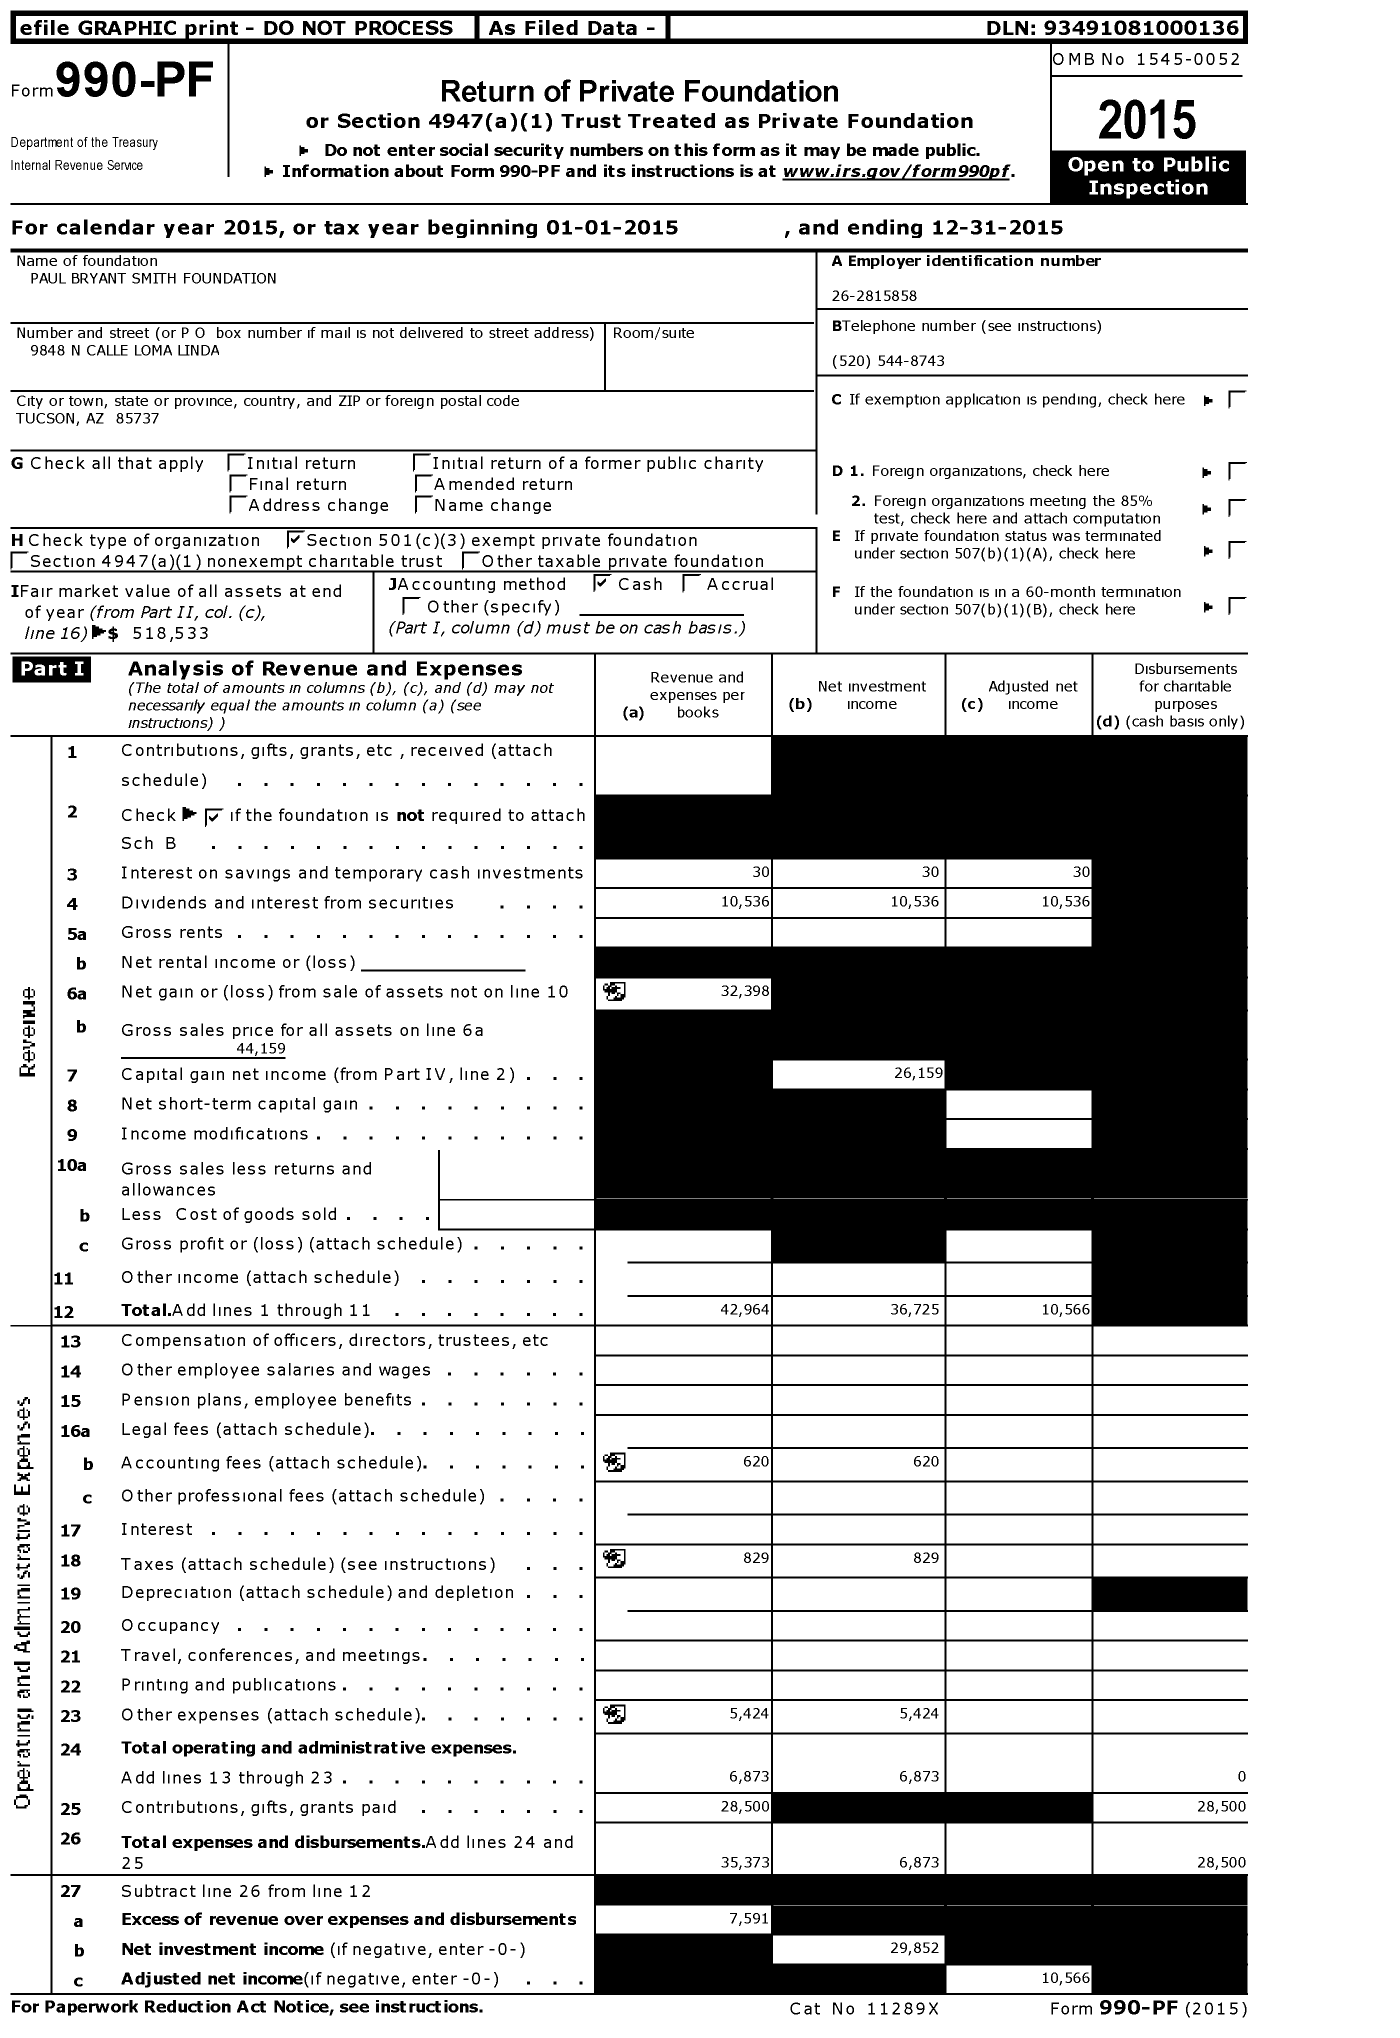 Image of first page of 2015 Form 990PF for Paul Bryant Smith Foundation